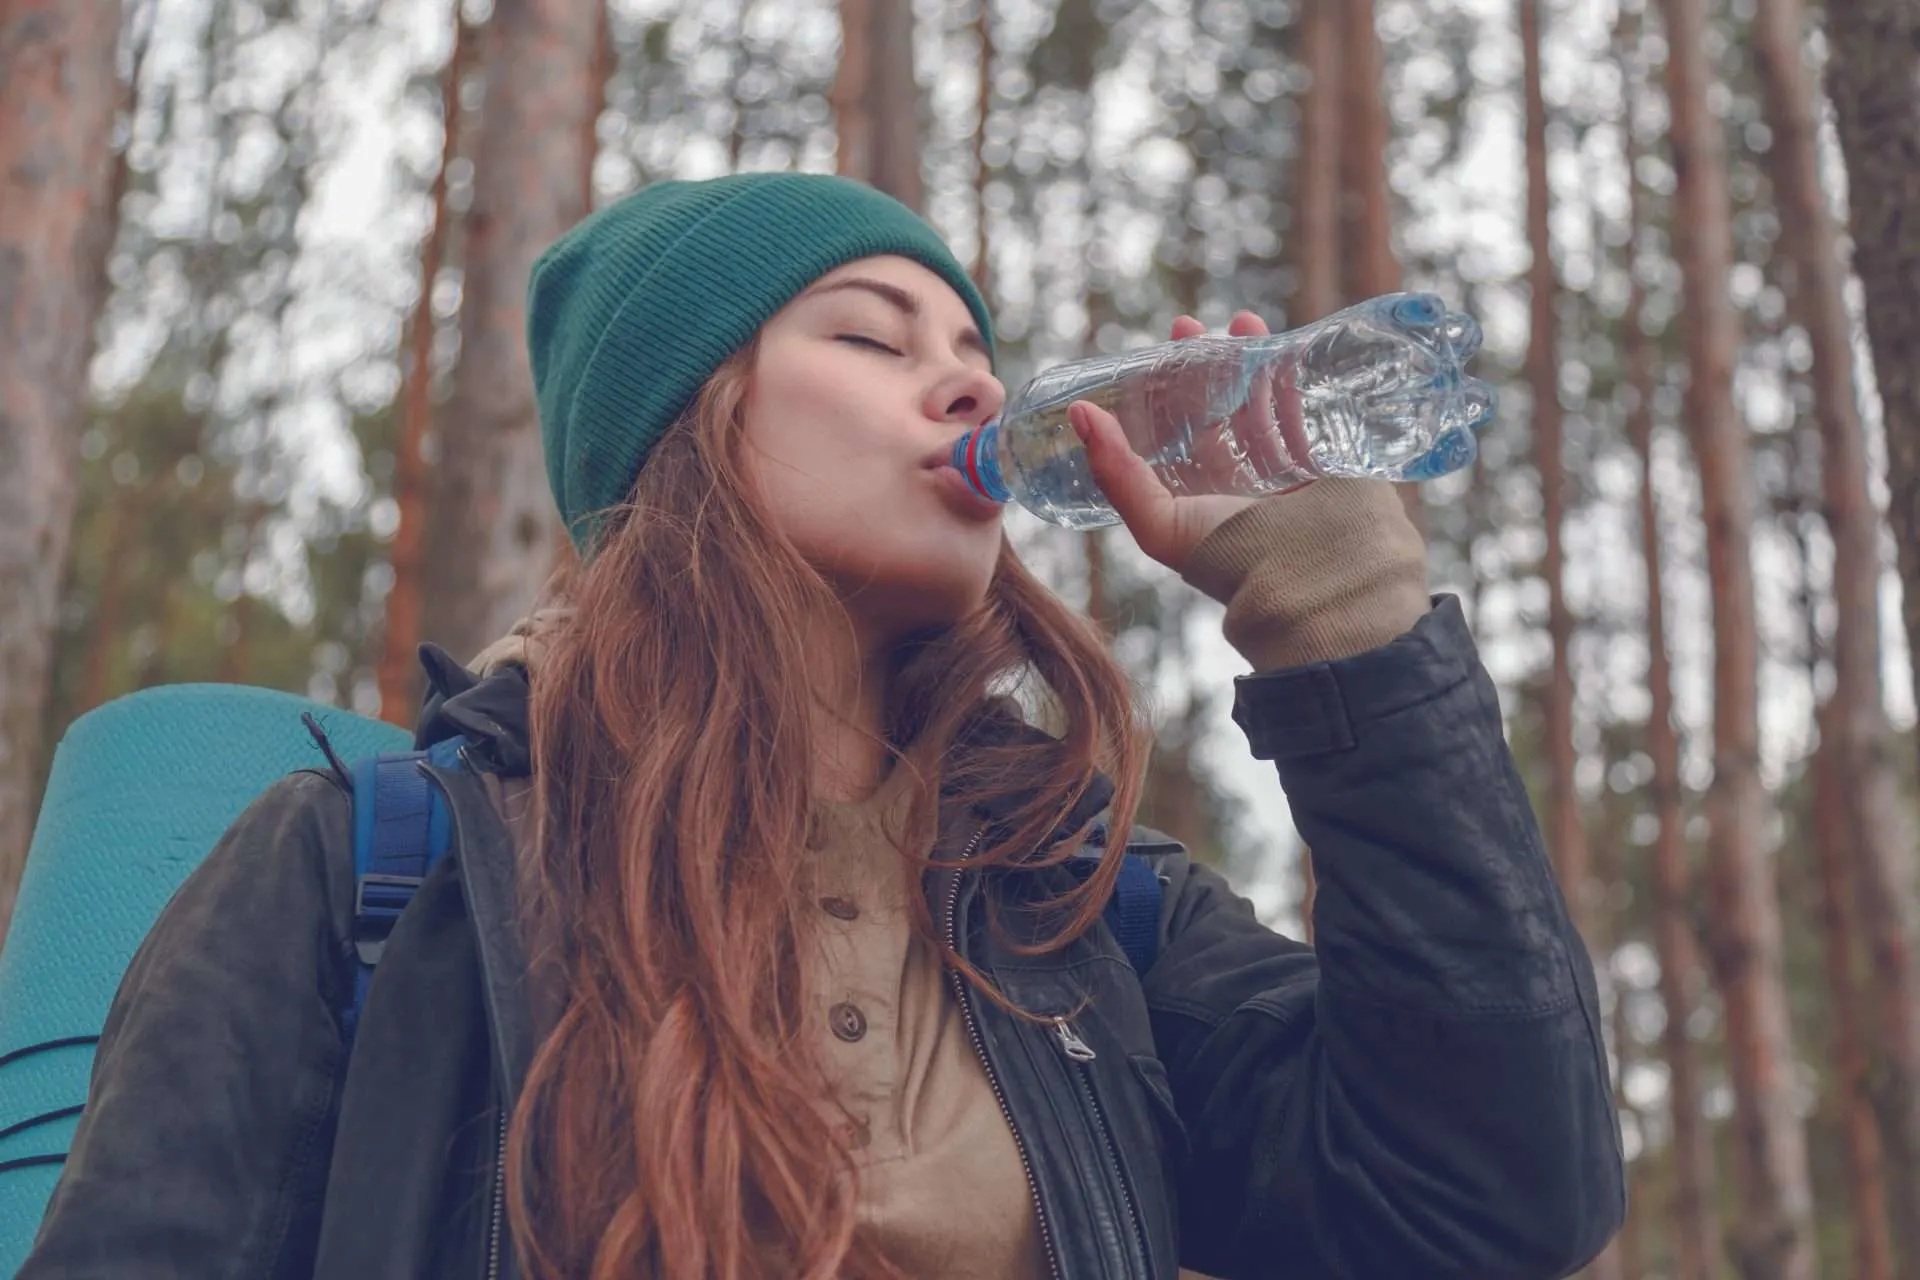 Woman drinking from water bottle while hiking.